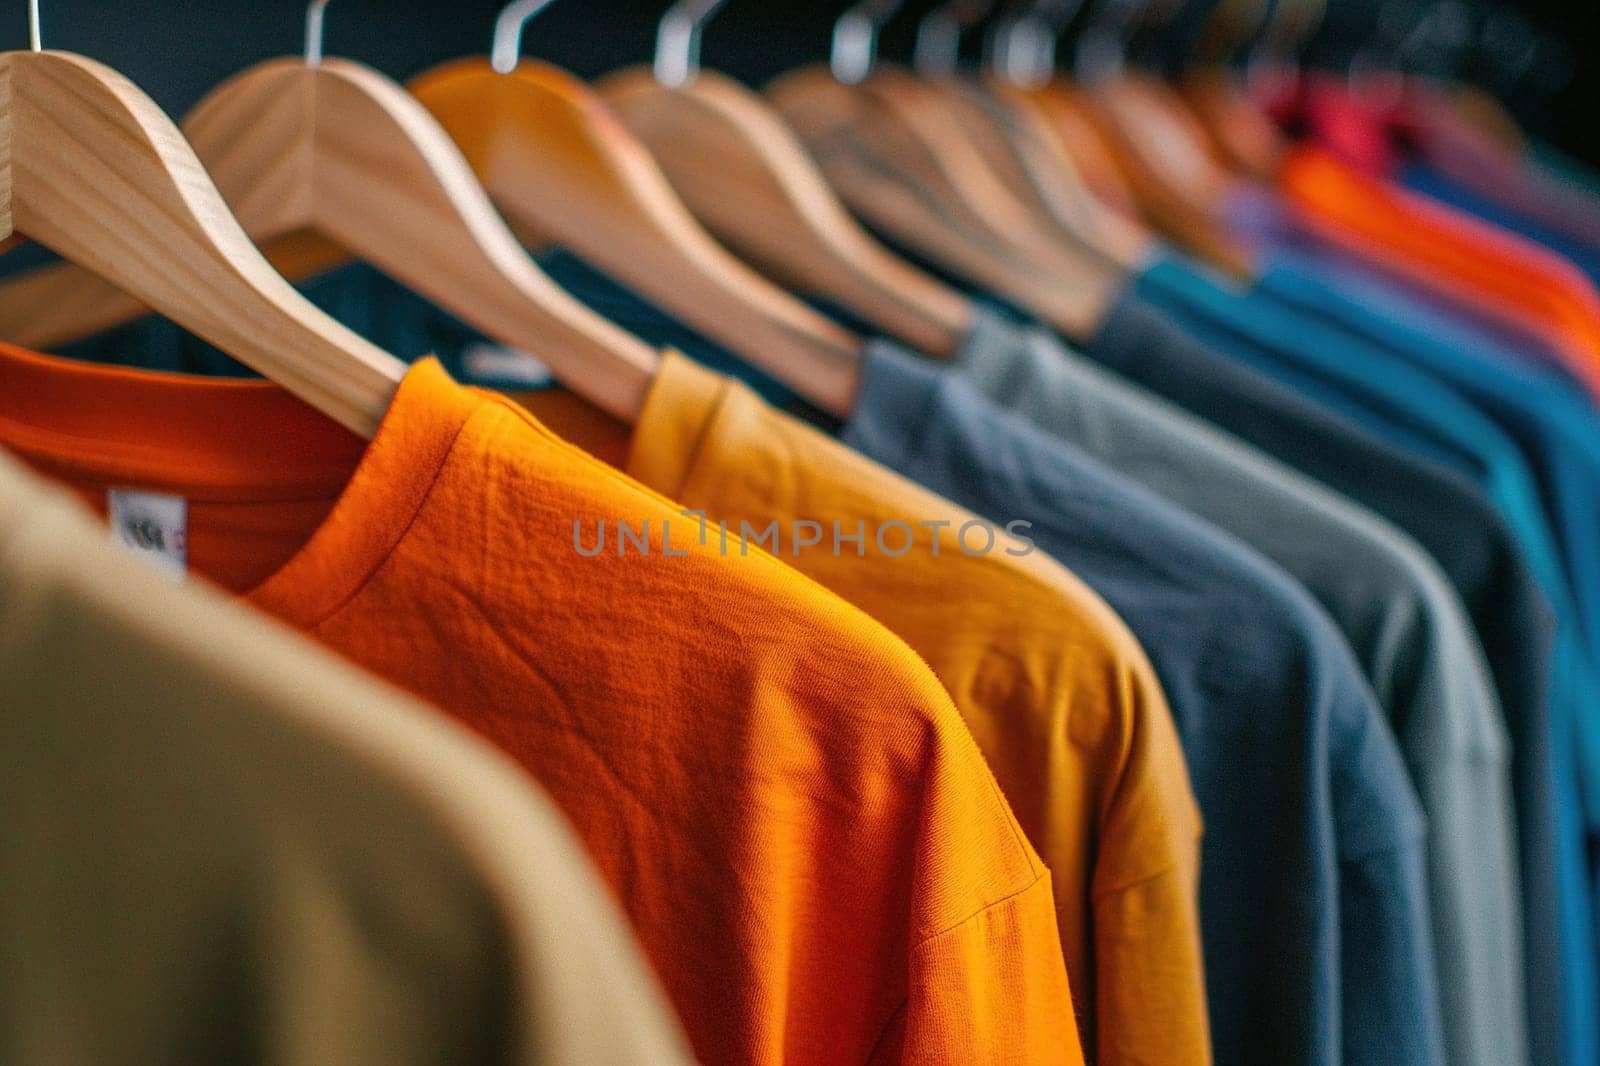 A lot of T-shirts of different colors hang on hangers close-up.